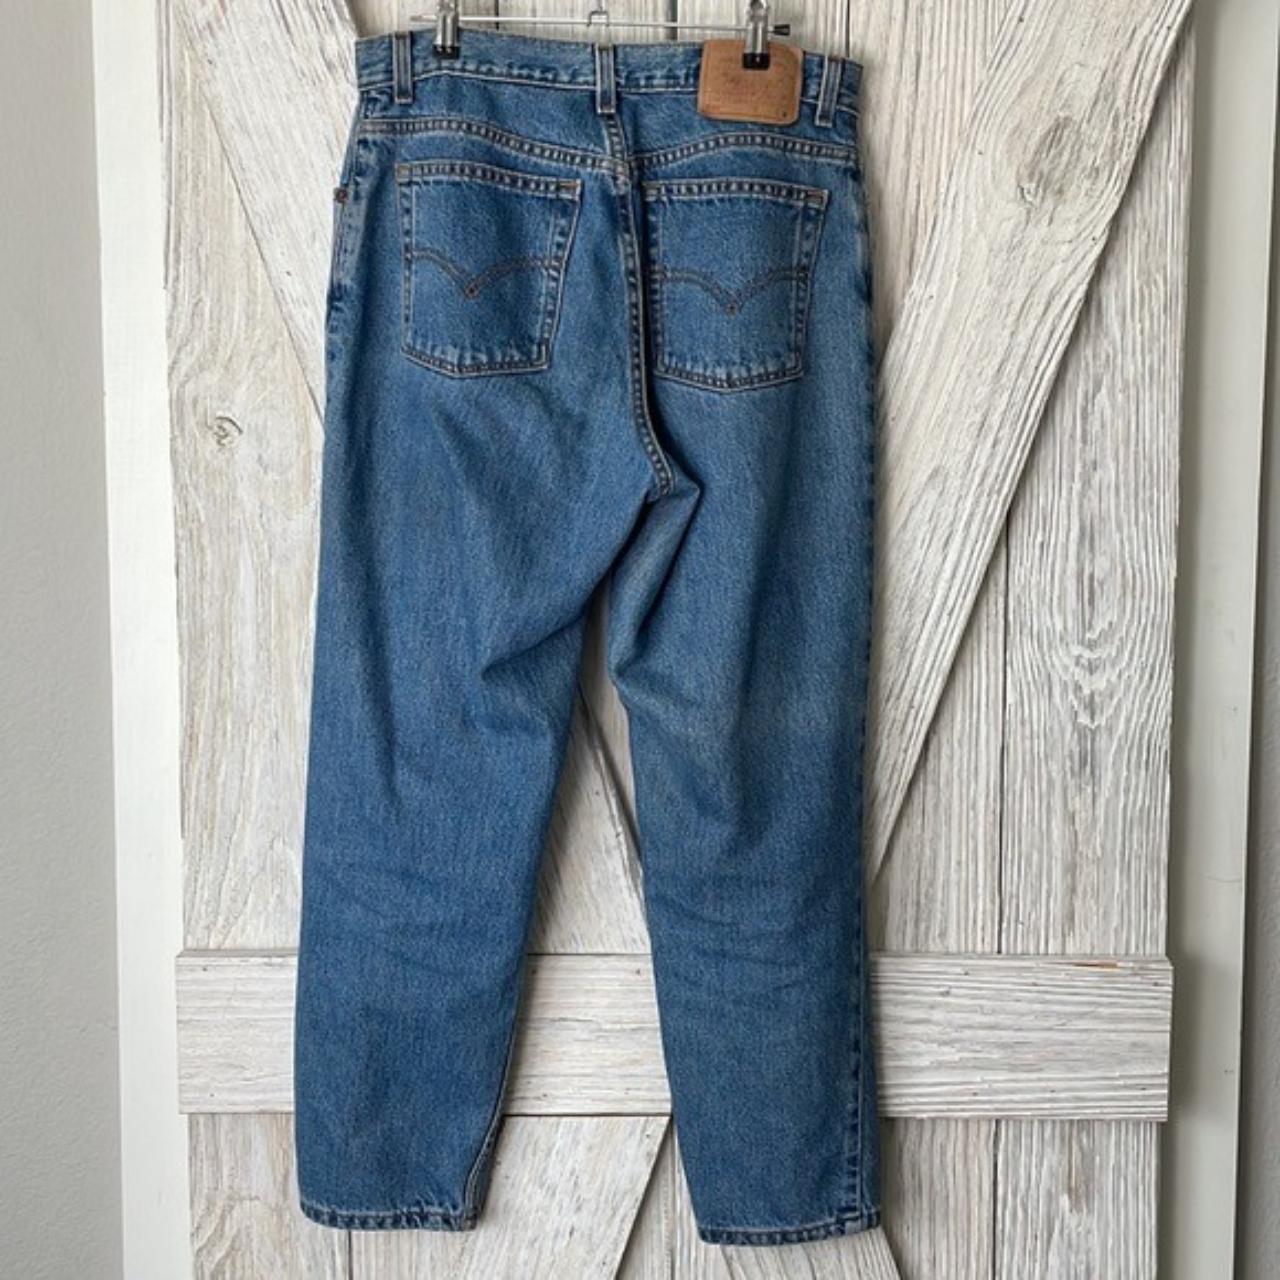 '90s Vintage Levi's 550 Hi-Waisted Relaxed Tapered... - Depop